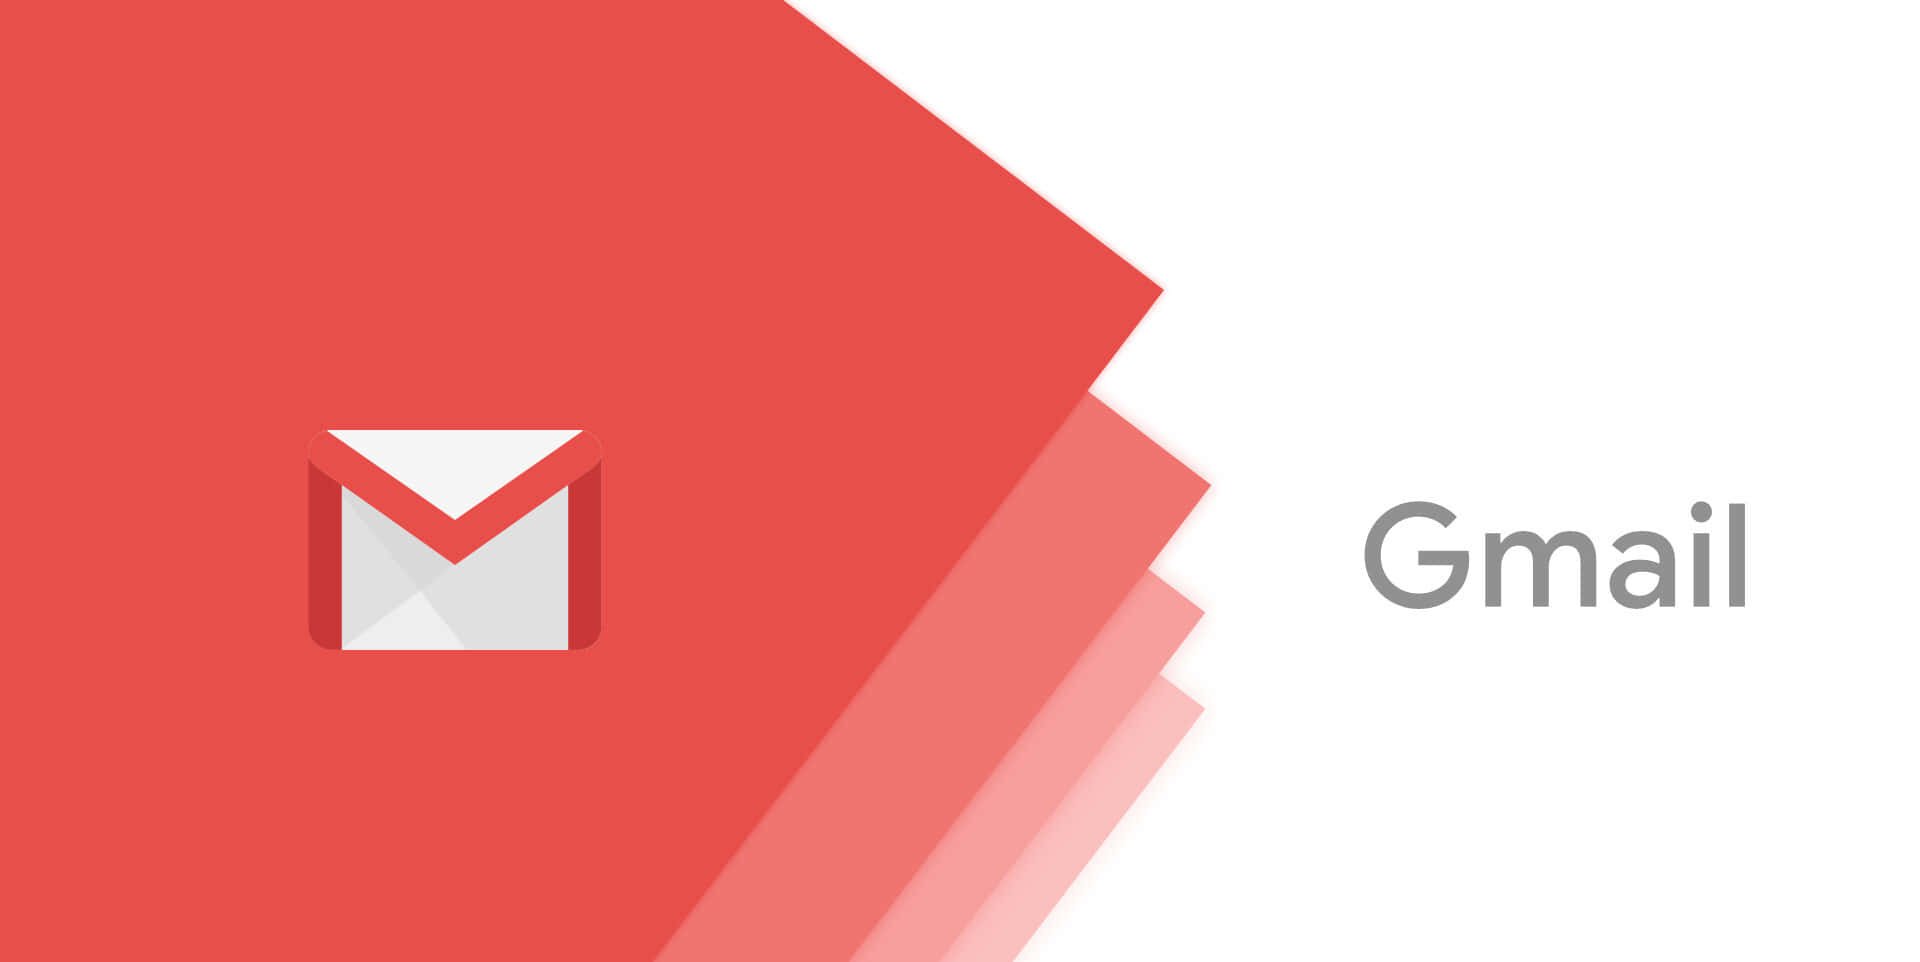 Log into Gmail and stay connected.